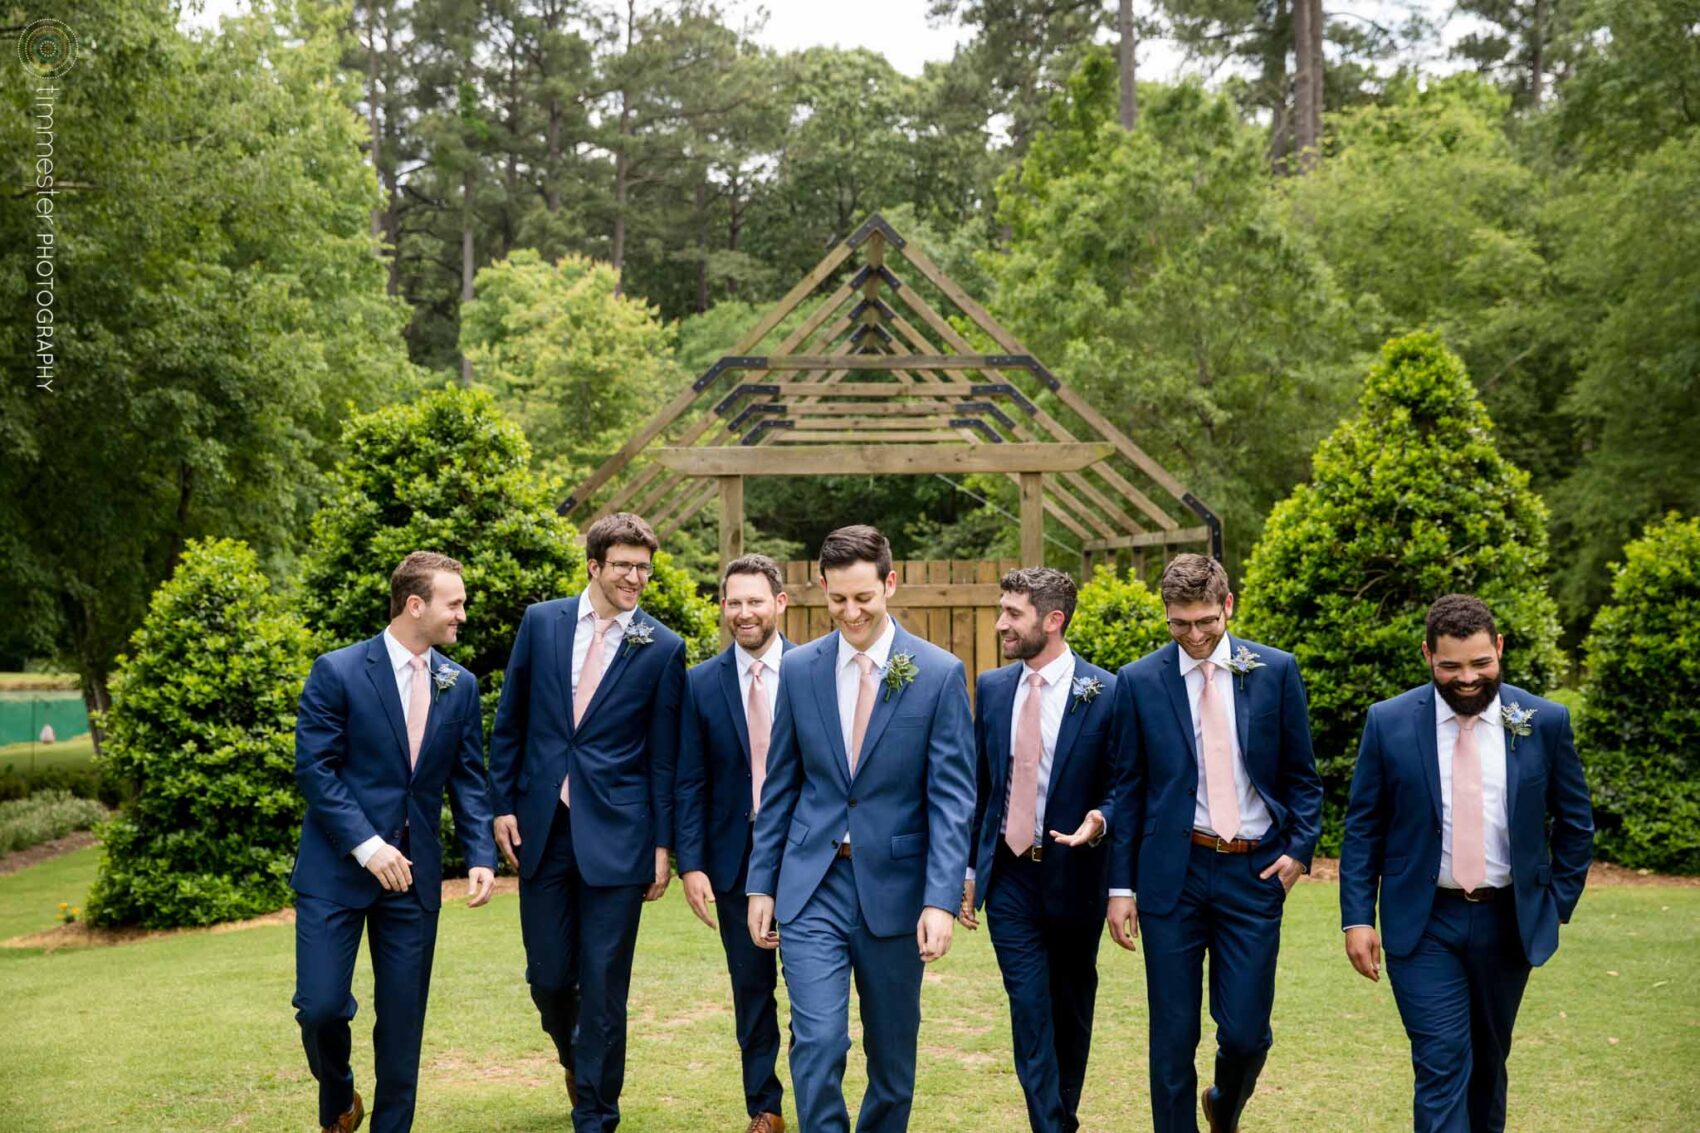 Chapel Hill wedding at the Chapel Hill Carriage House & Gardens